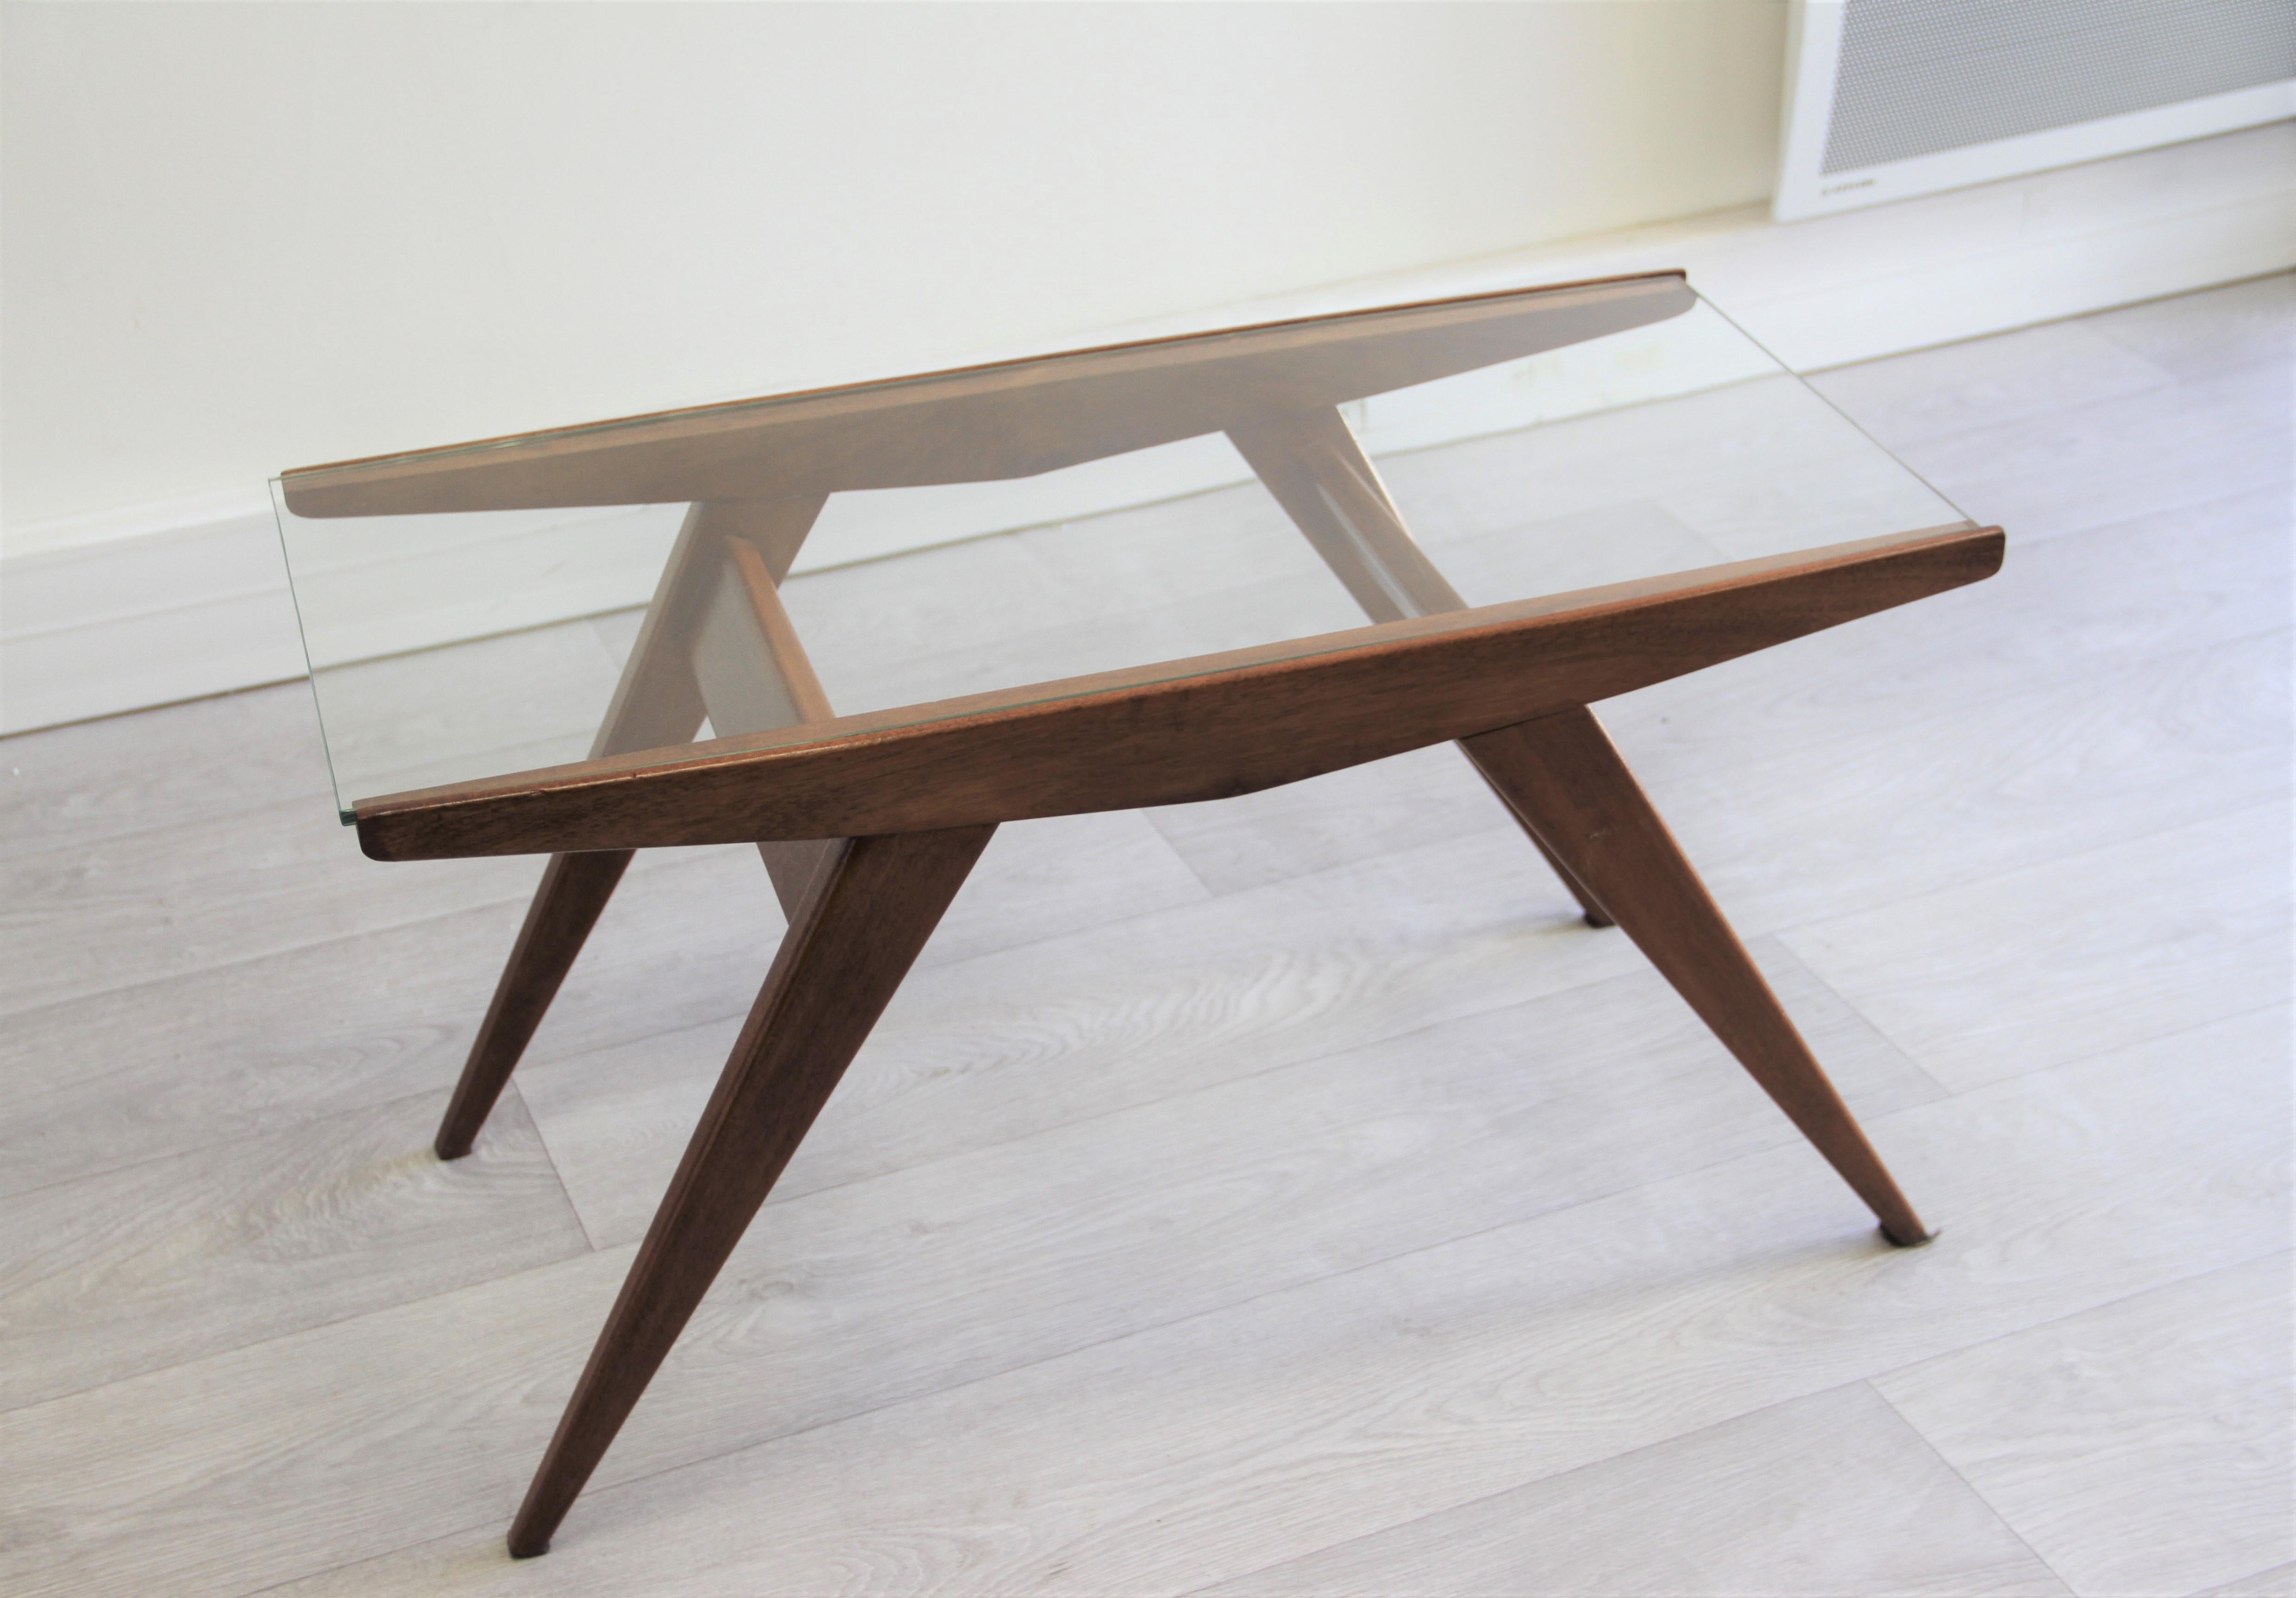 The rectangular glass top rests on a walnut structure, with angled supports, Italian, 1950s.